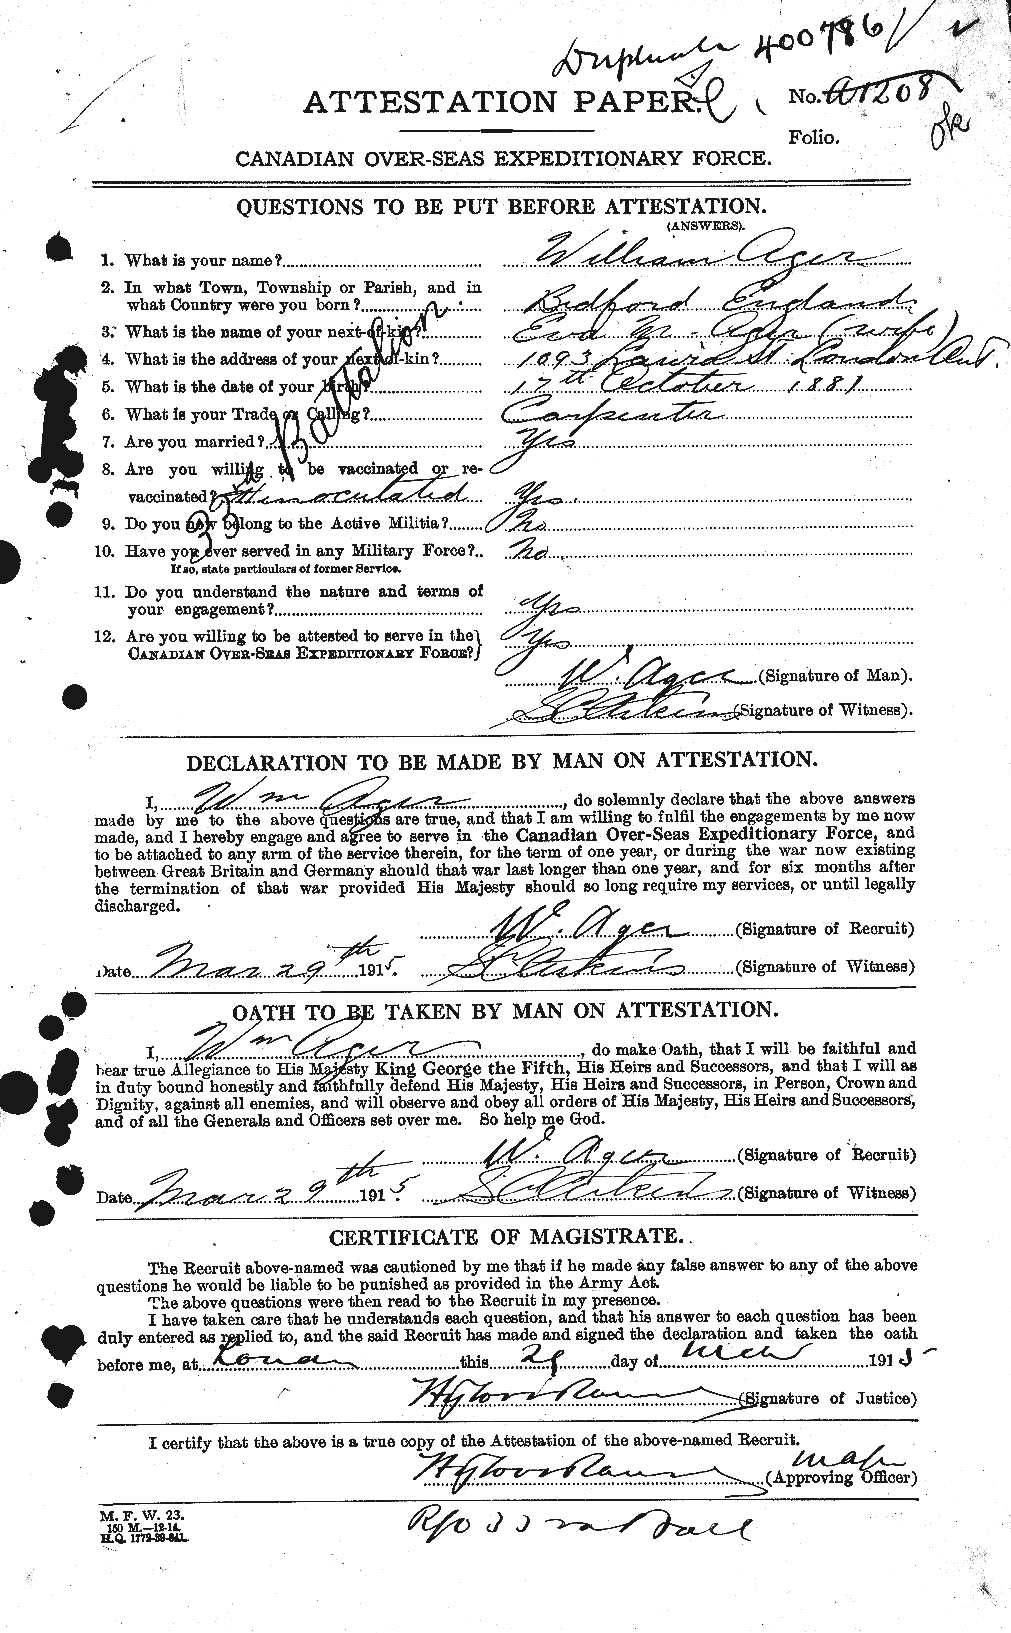 Personnel Records of the First World War - CEF 203712a